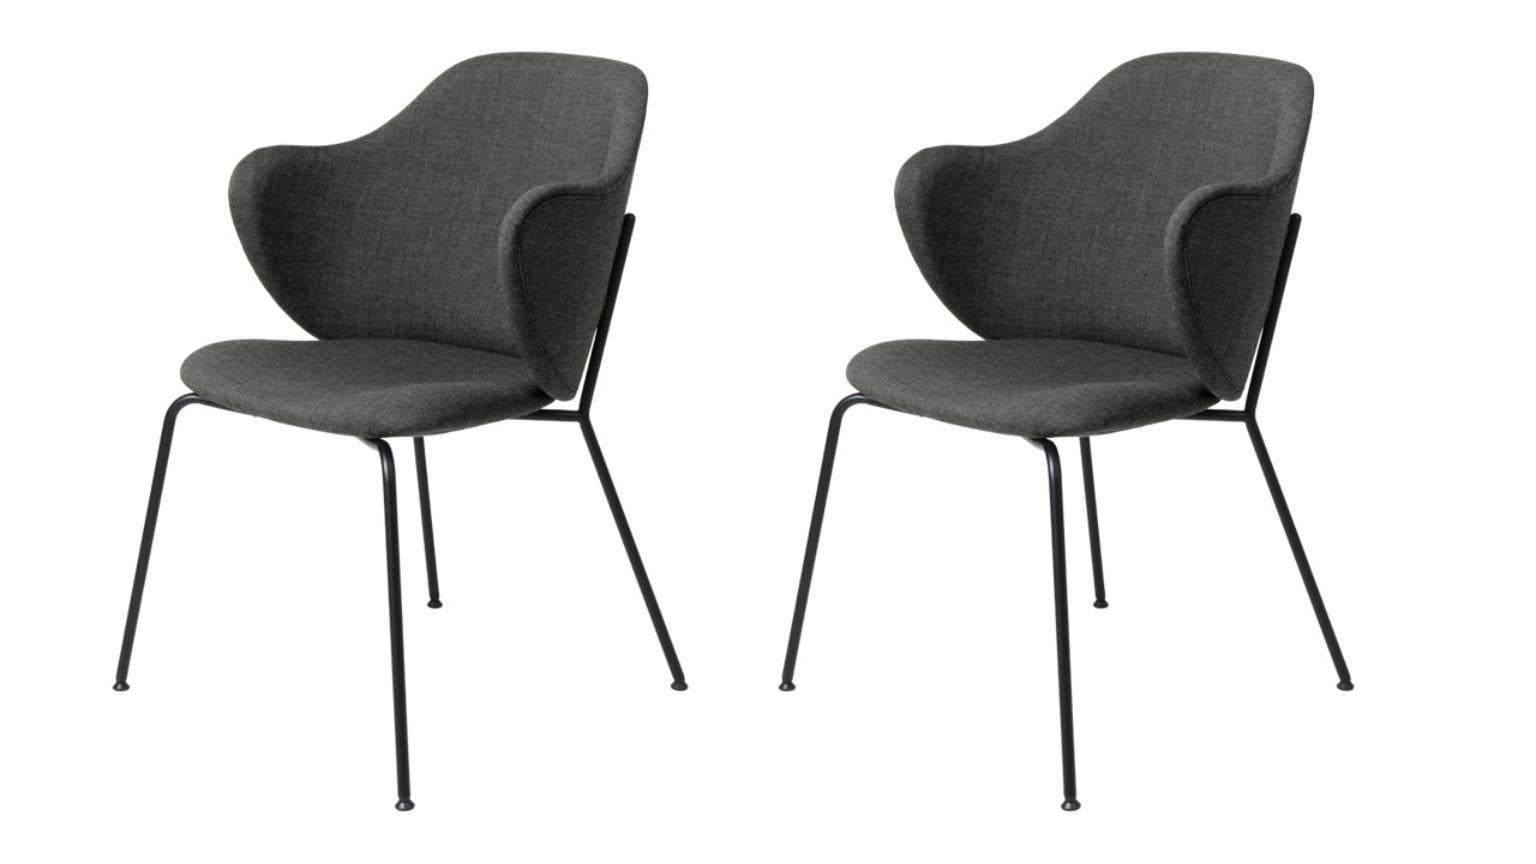 Set of 2 grey remix lassen chairs by Lassen
Dimensions: W 58 x D 60 x H 88 cm 
Materials: textile

The Lassen chair by Flemming Lassen, Magnus Sangild and Marianne Viktor was launched in 2018 as an ode to Flemming Lassen’s uncompromising